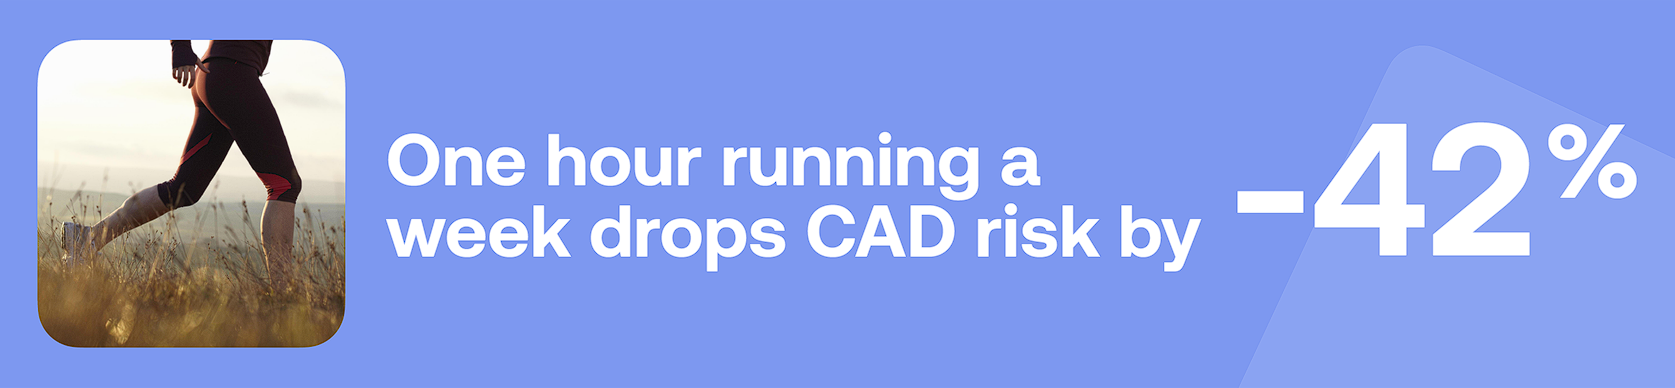 One hour running a week drops CAD risk by -42%